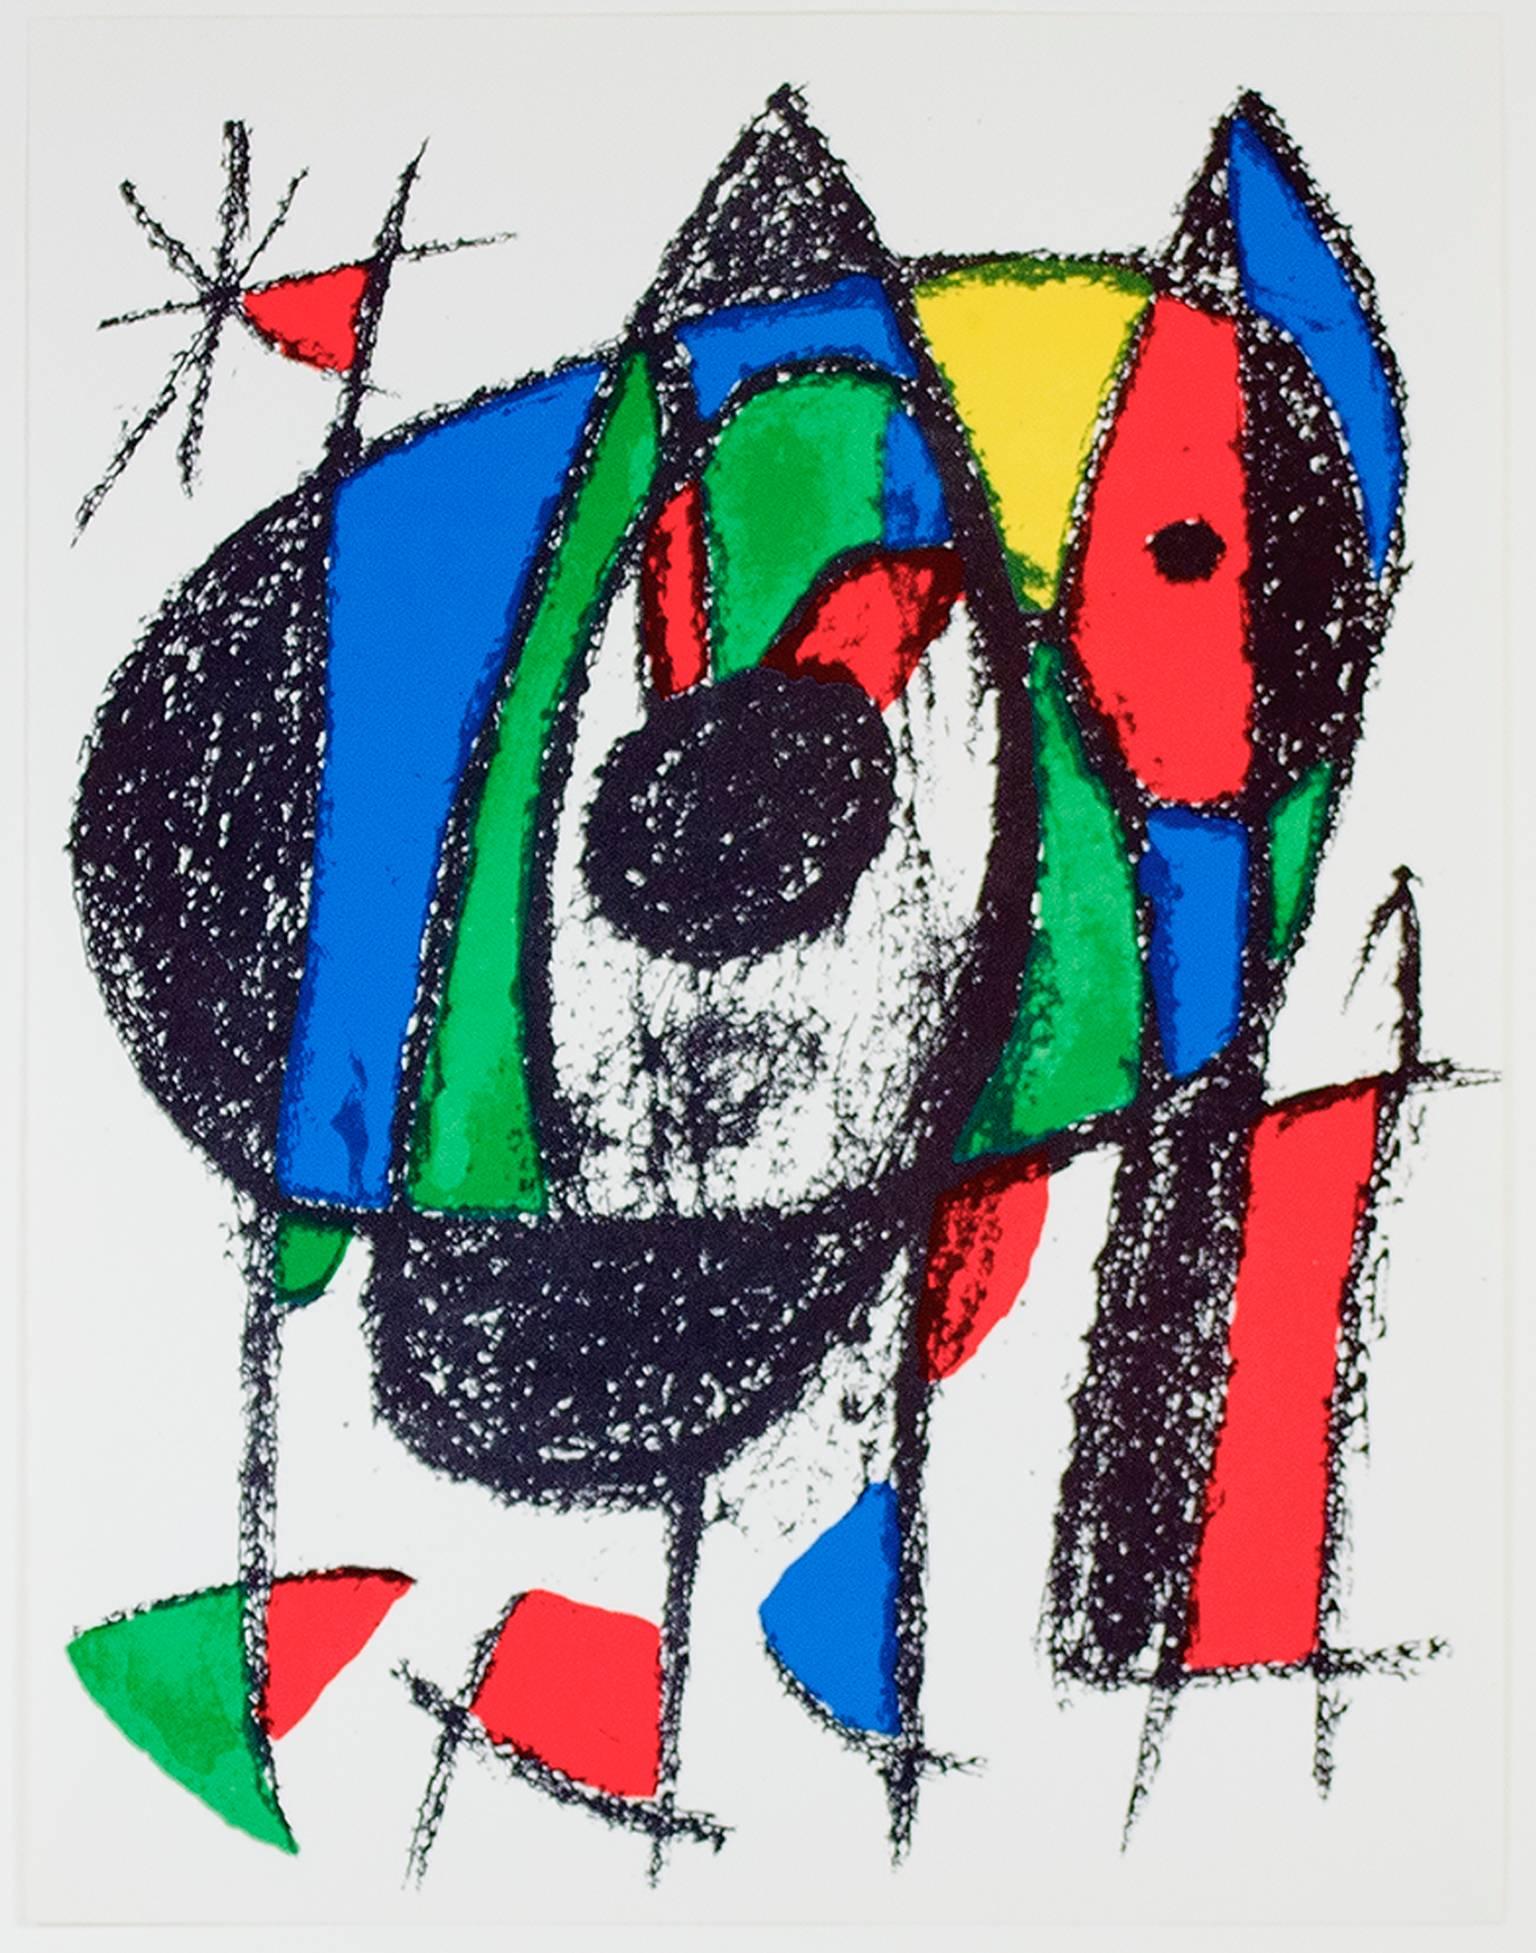 "Original Lithograph V" is an original color lithograph by Joan Miro, published in "Miro Lithographs II, Maeght Publisher" in 1975. It depicts Miro's signature biomorphic abstract style in black, green, yellow, red, and blue. 

12 9/16" x 9 3/4"